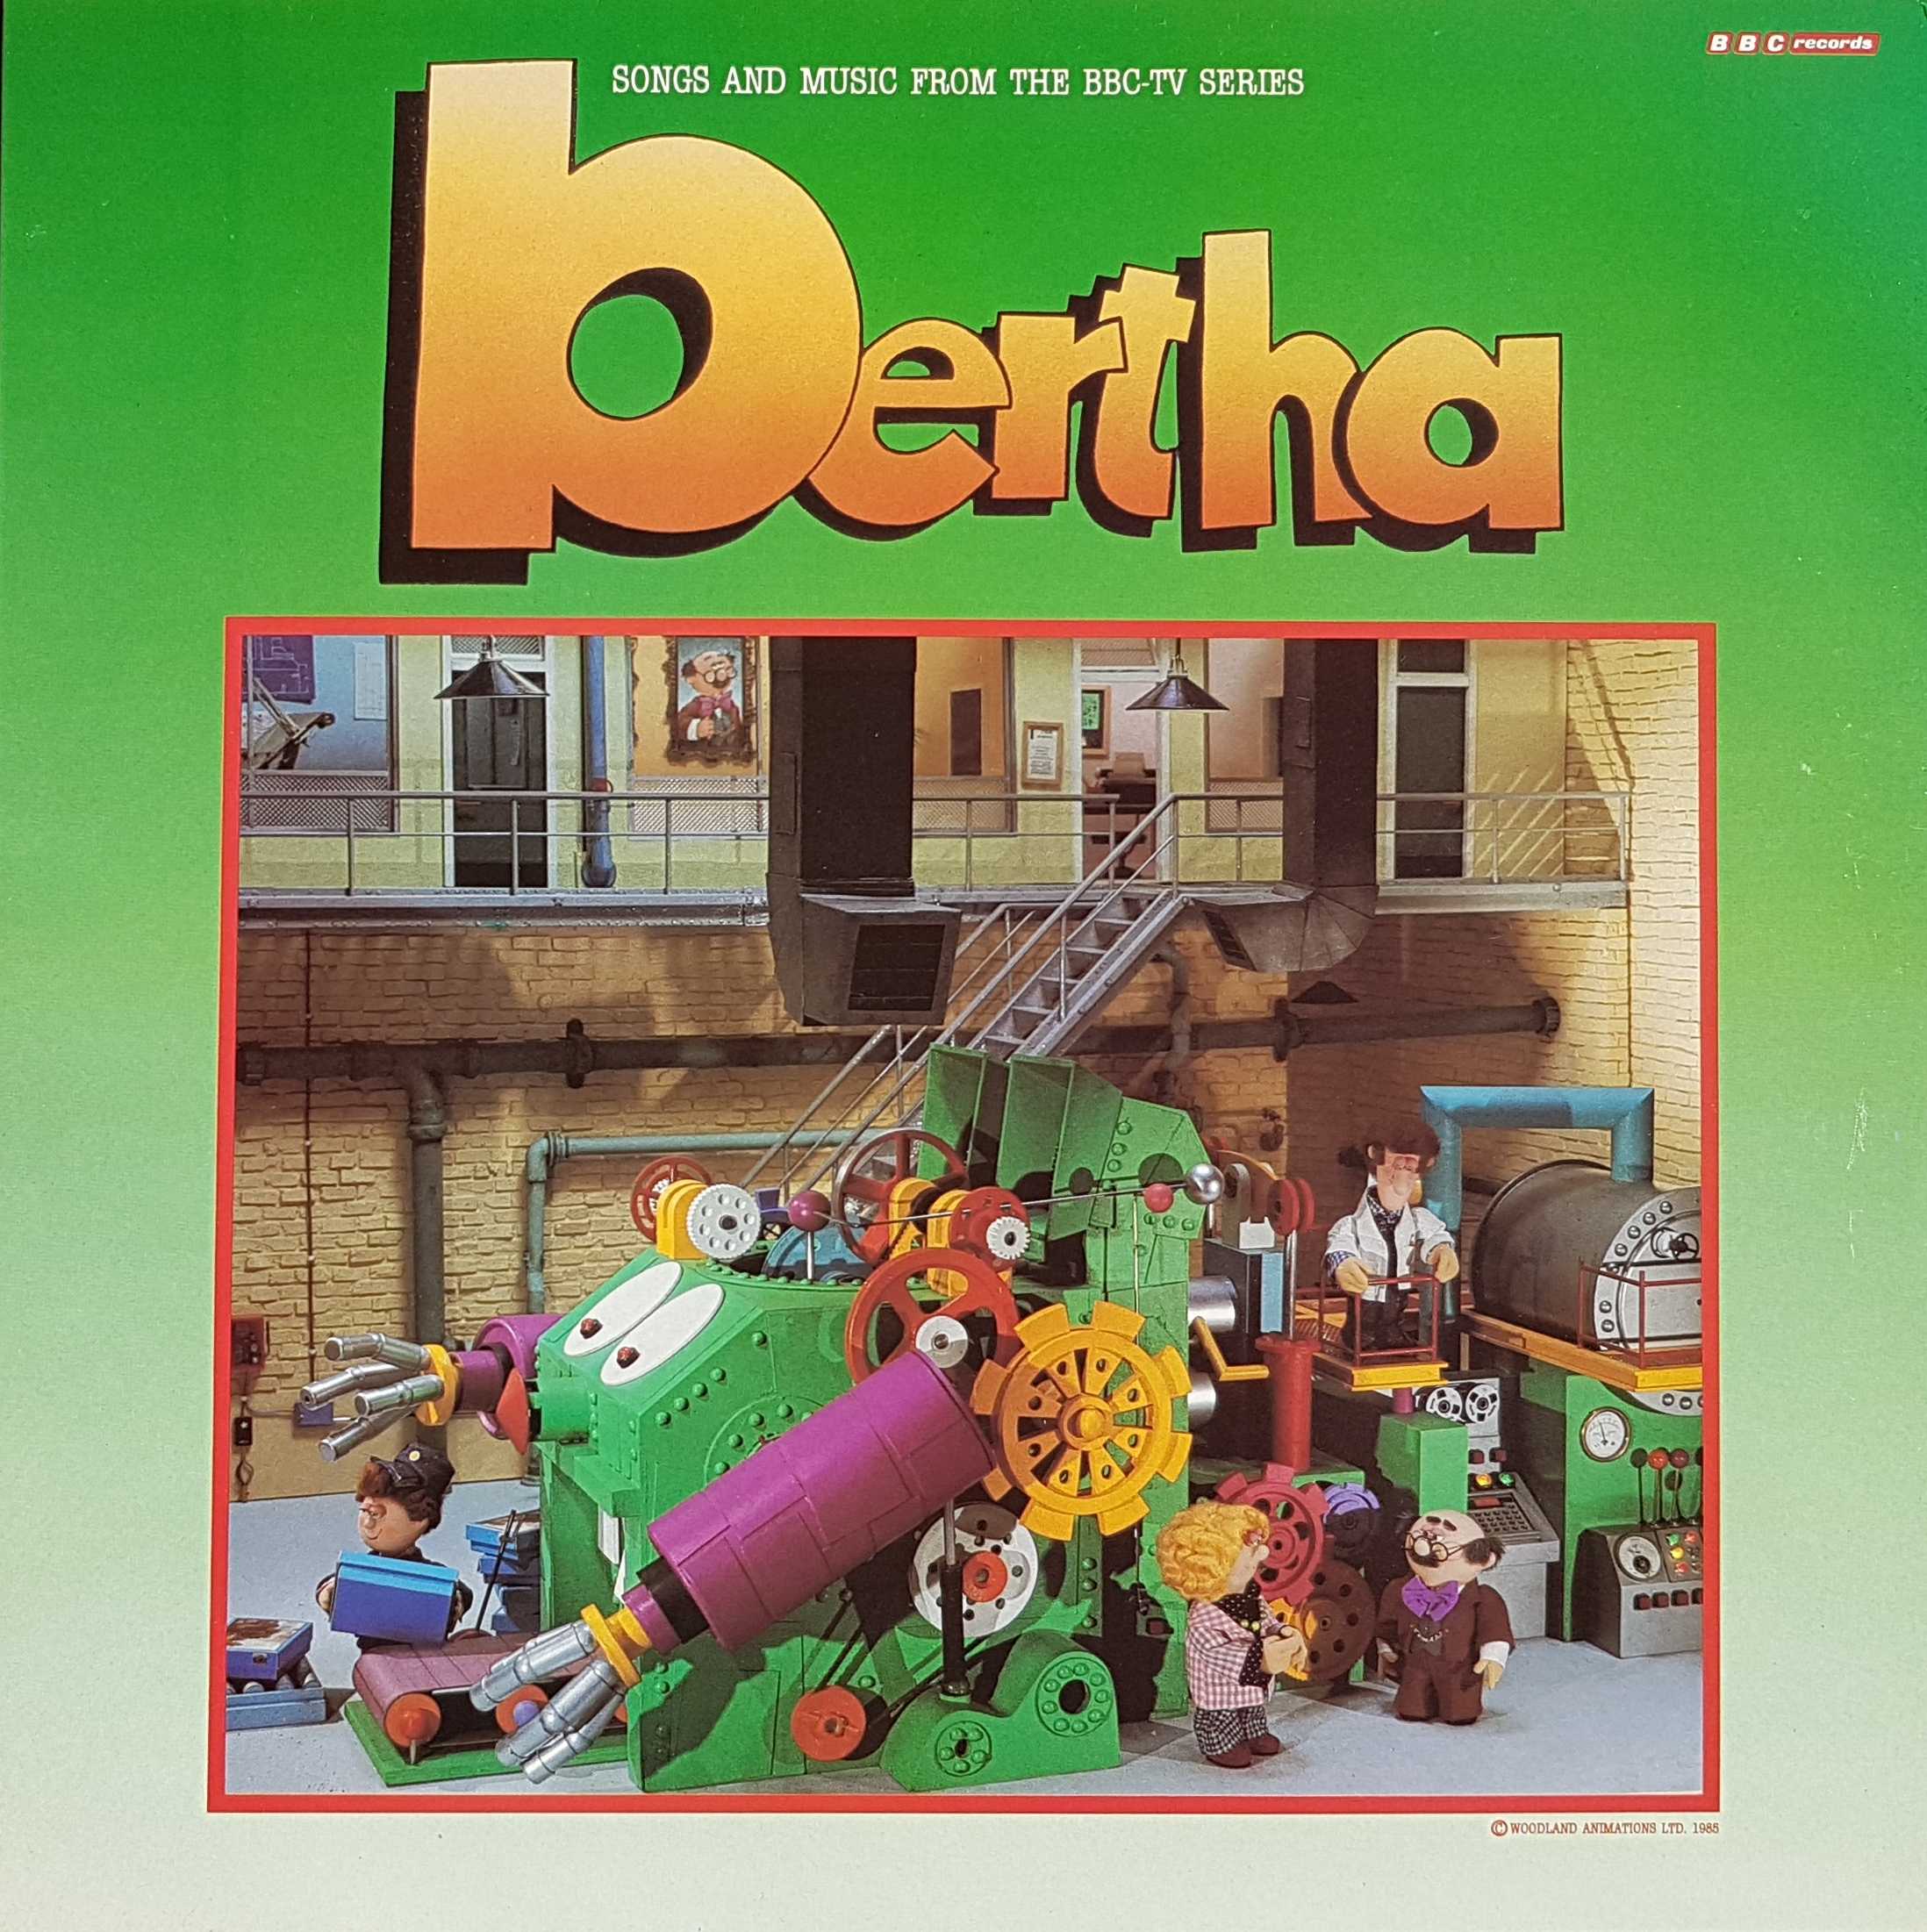 Picture of REH 585 Bertha by artist Bryan Daly from the BBC albums - Records and Tapes library